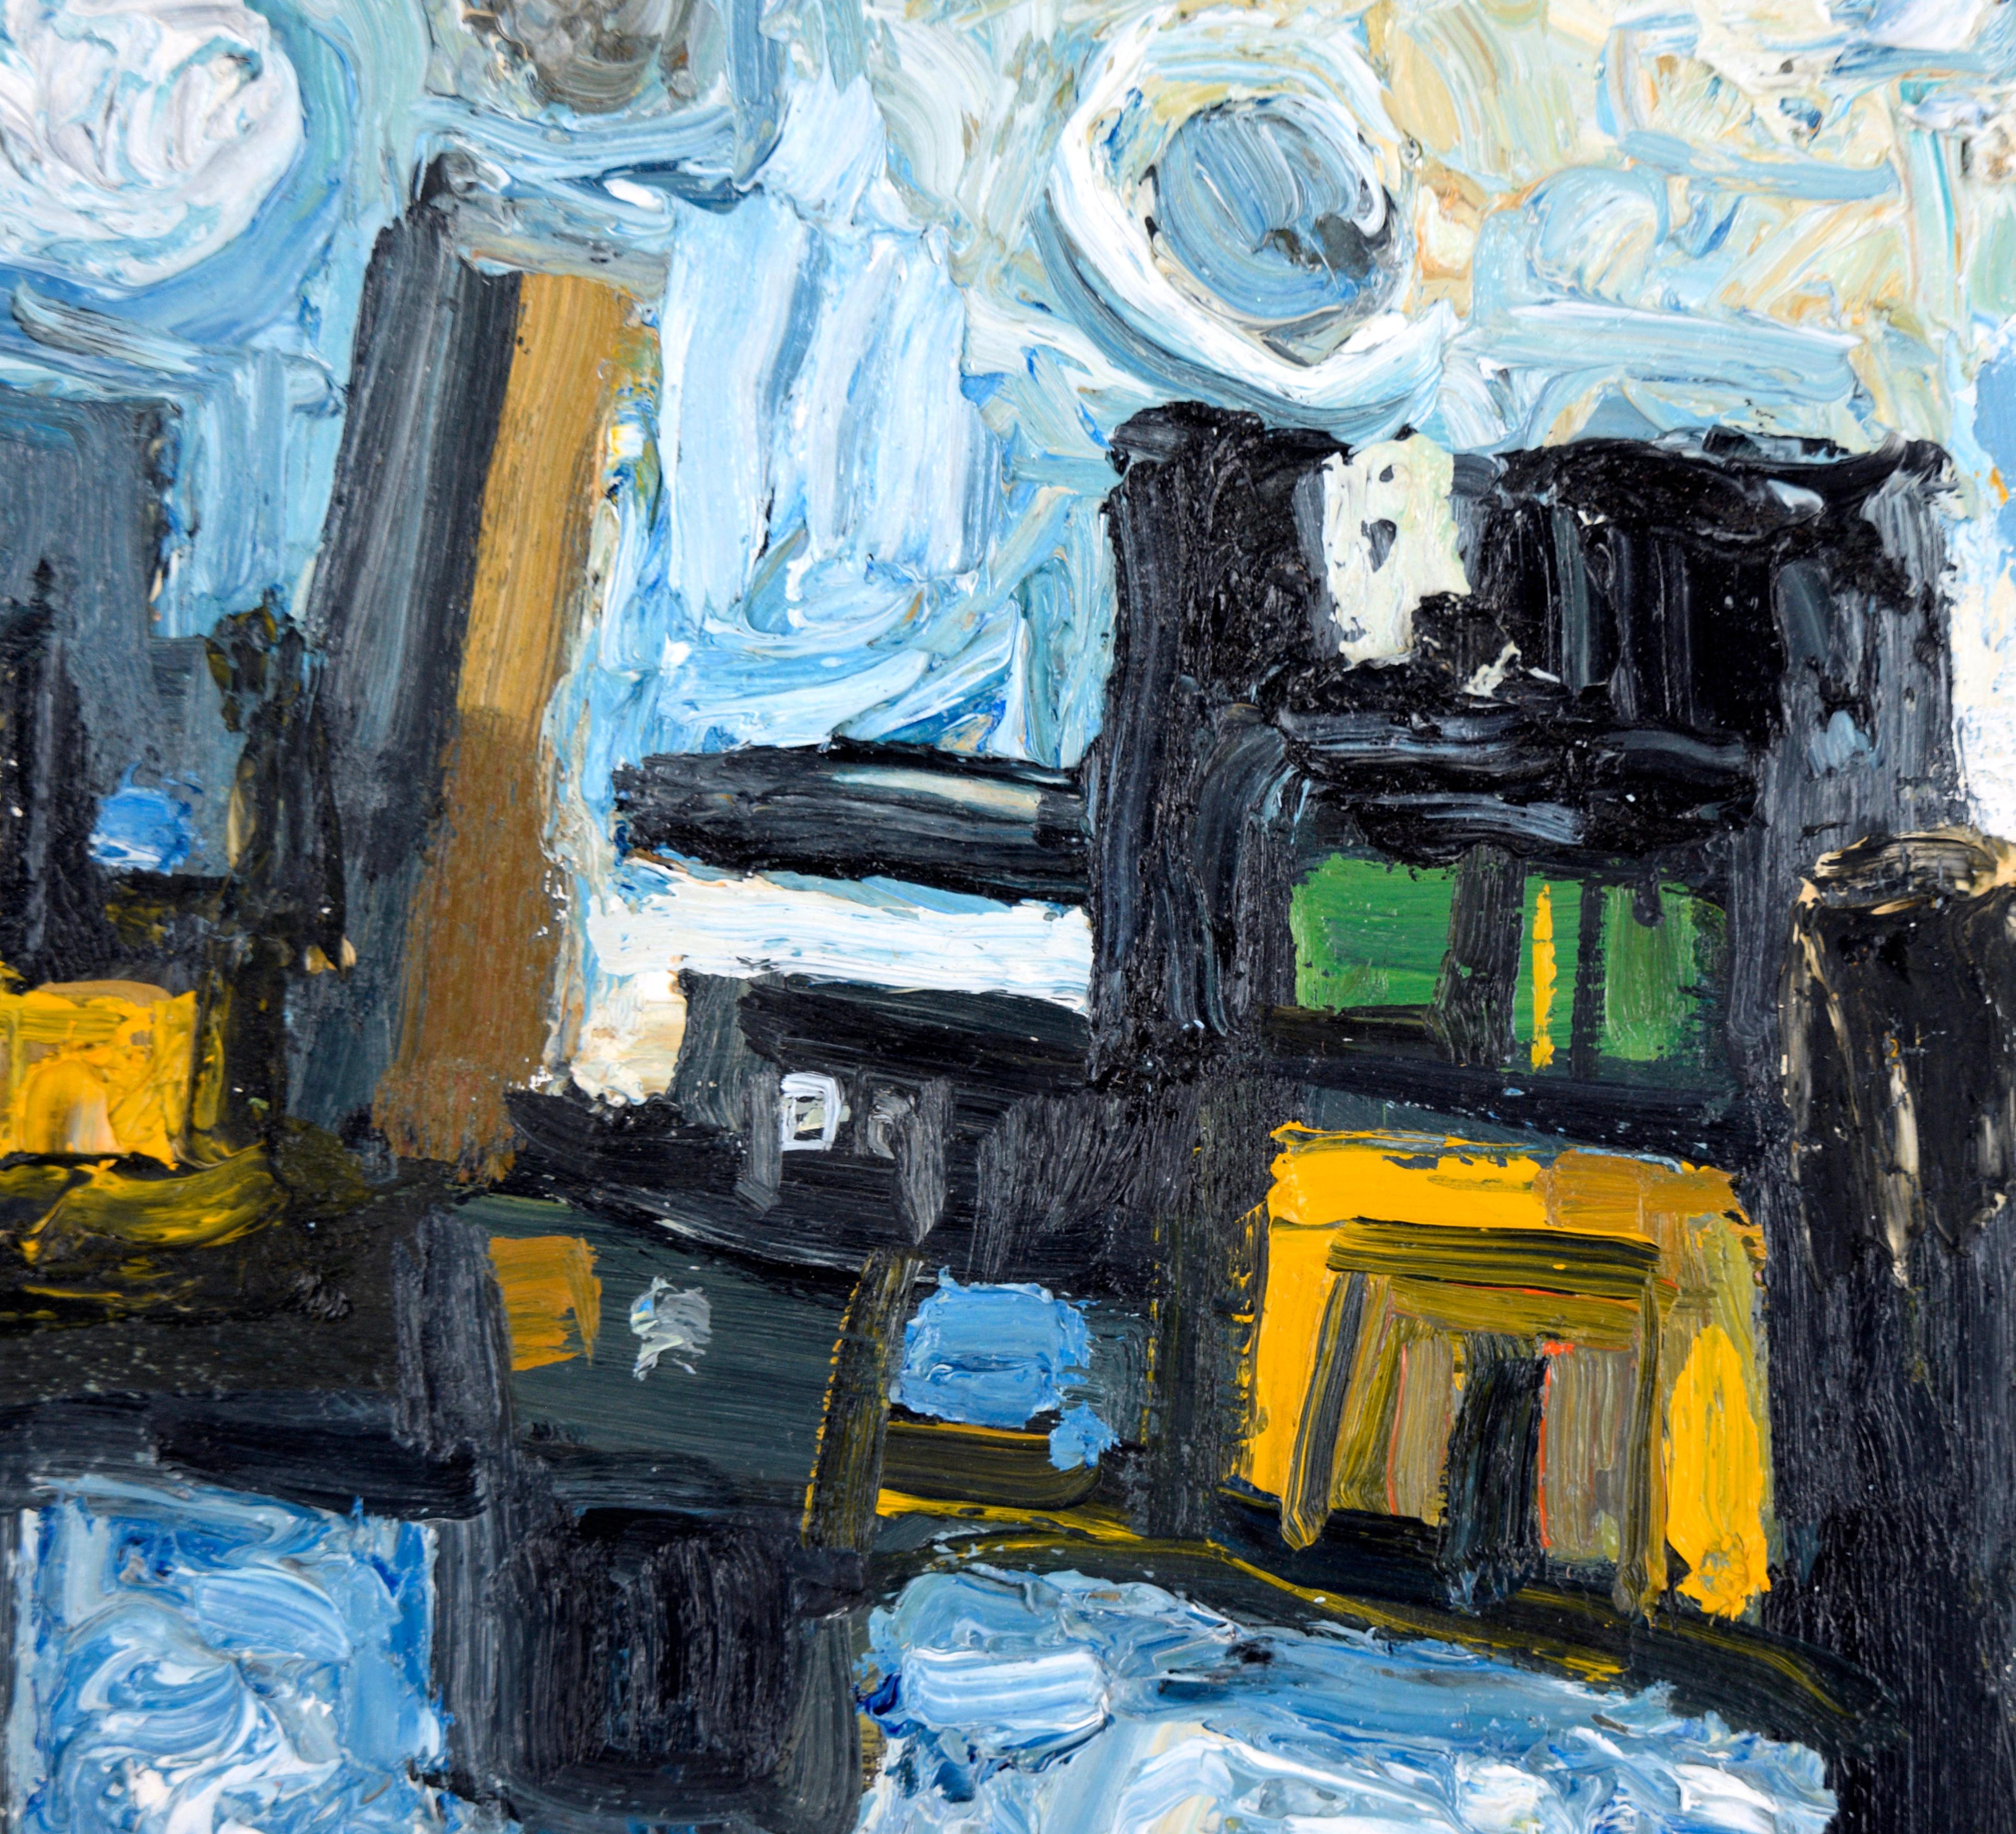 Abstract Surrealist Harbor Cityscape - Oil on Board - Gray Landscape Painting by Jim Spitzer